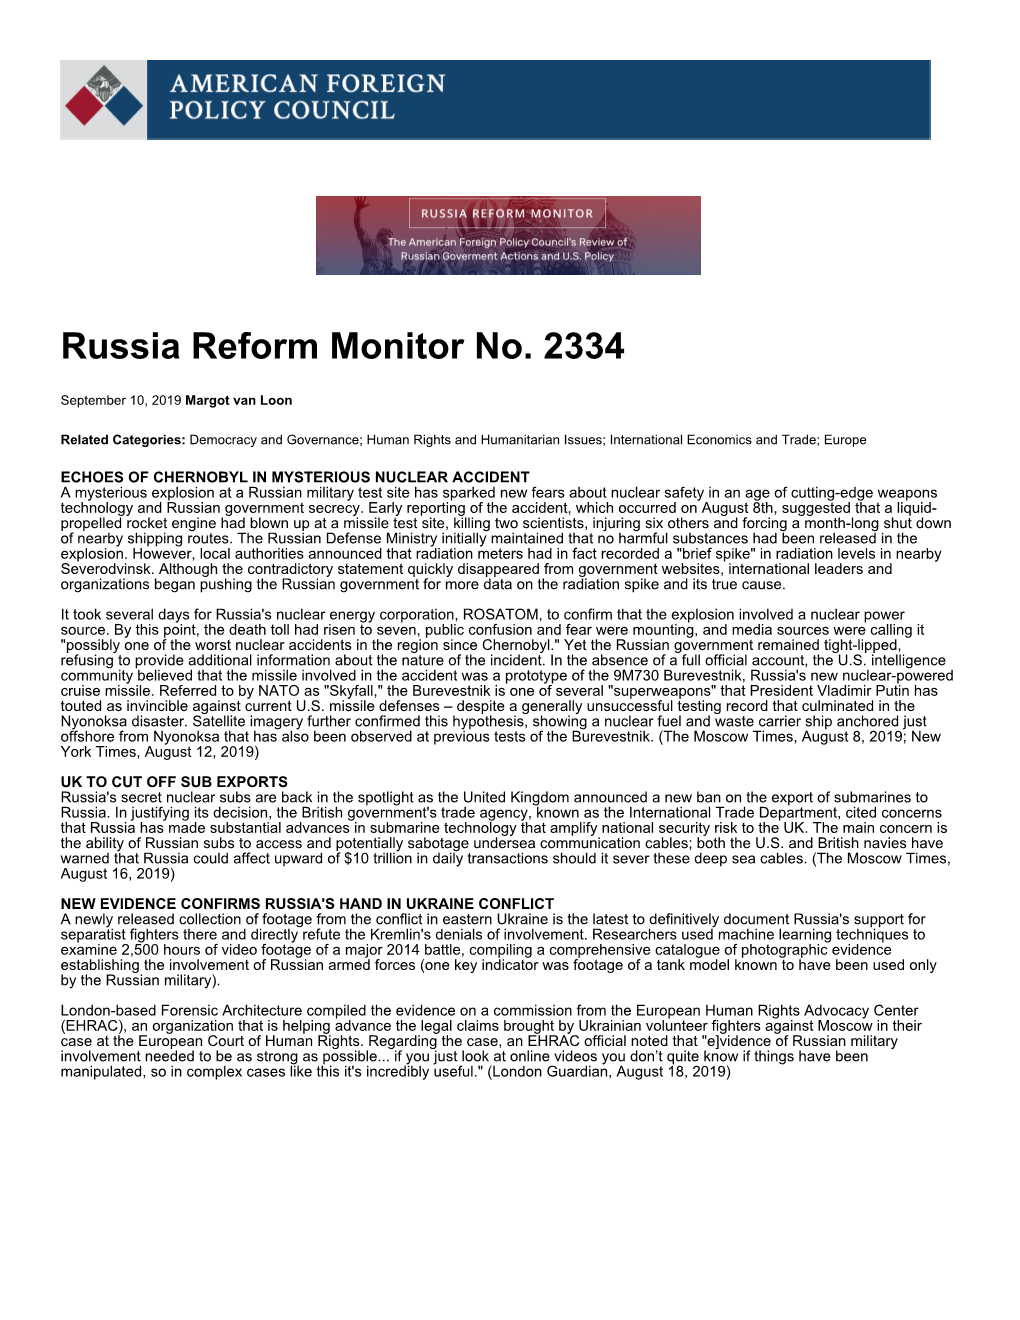 Russia Reform Monitor No. 2334 | American Foreign Policy Council